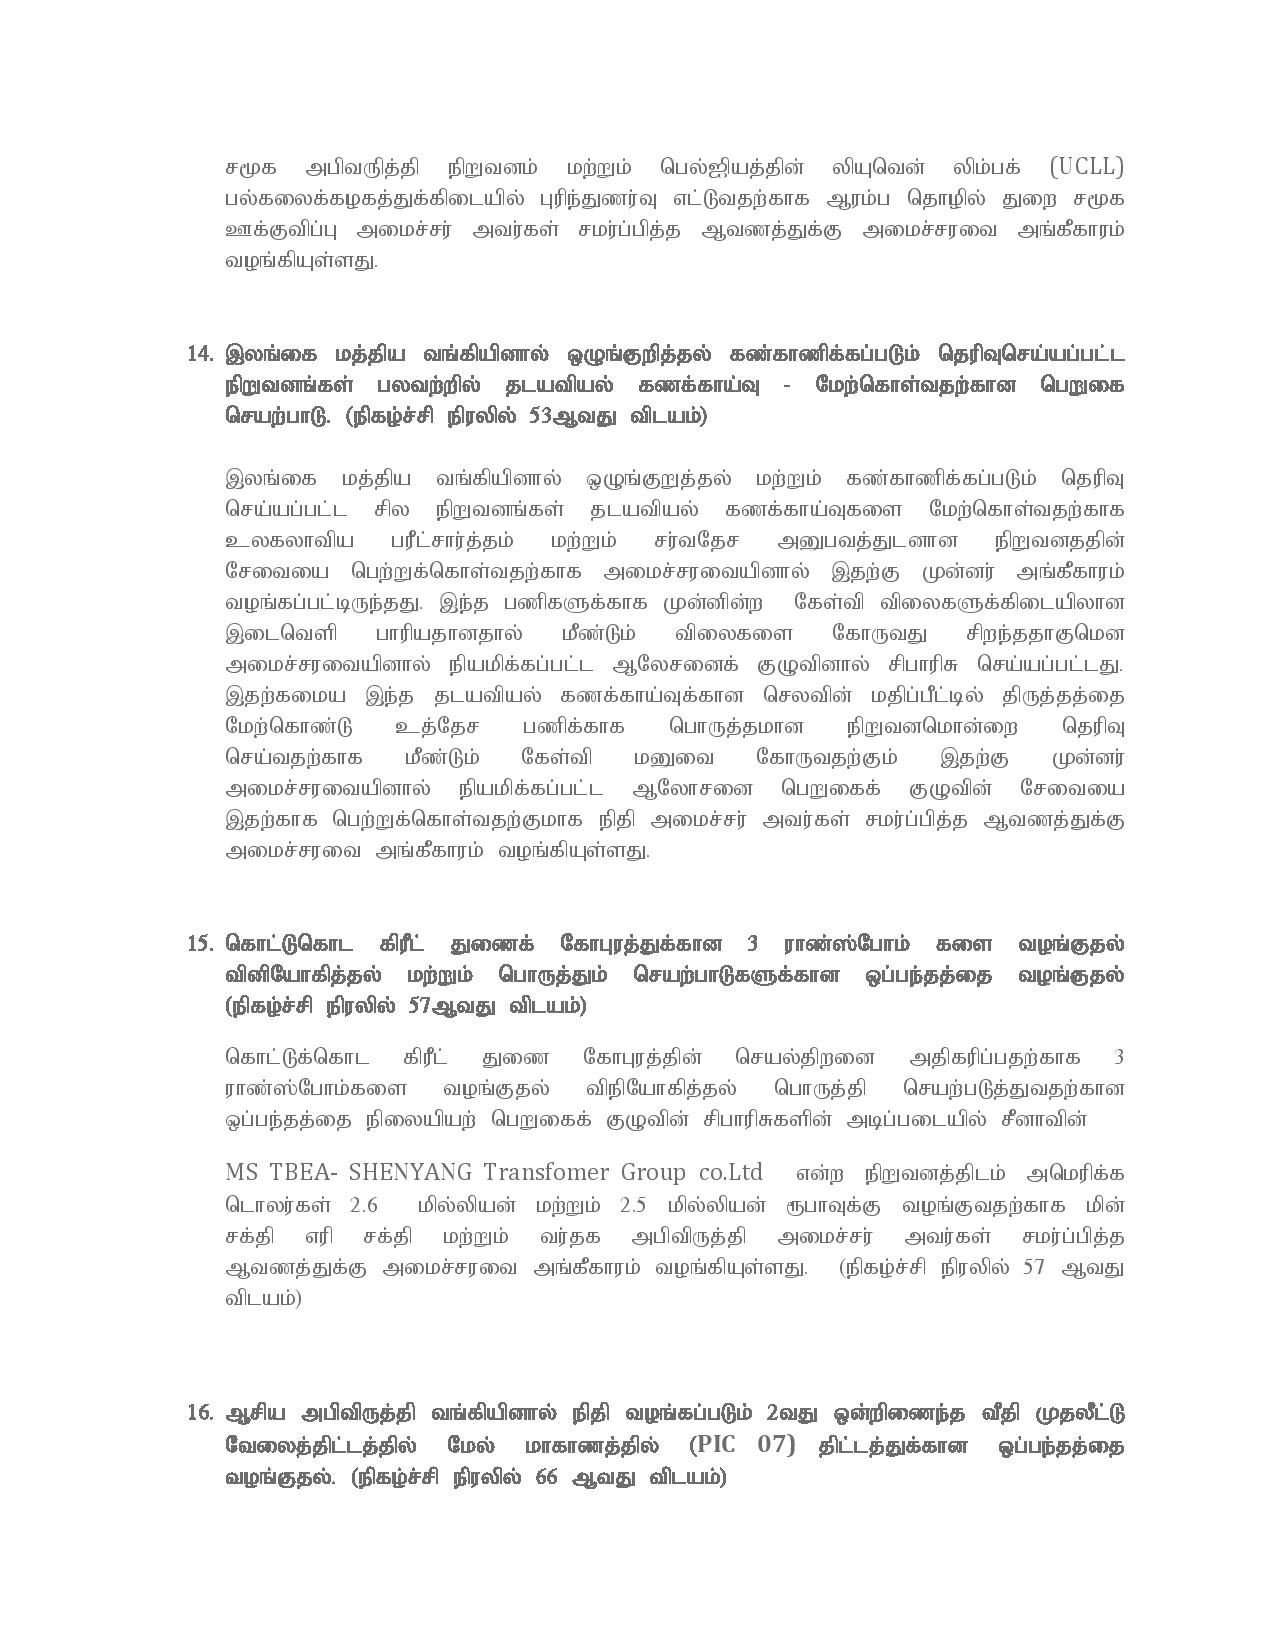 Taamil Cabinet 07.07.2019 1 page 006 Copy